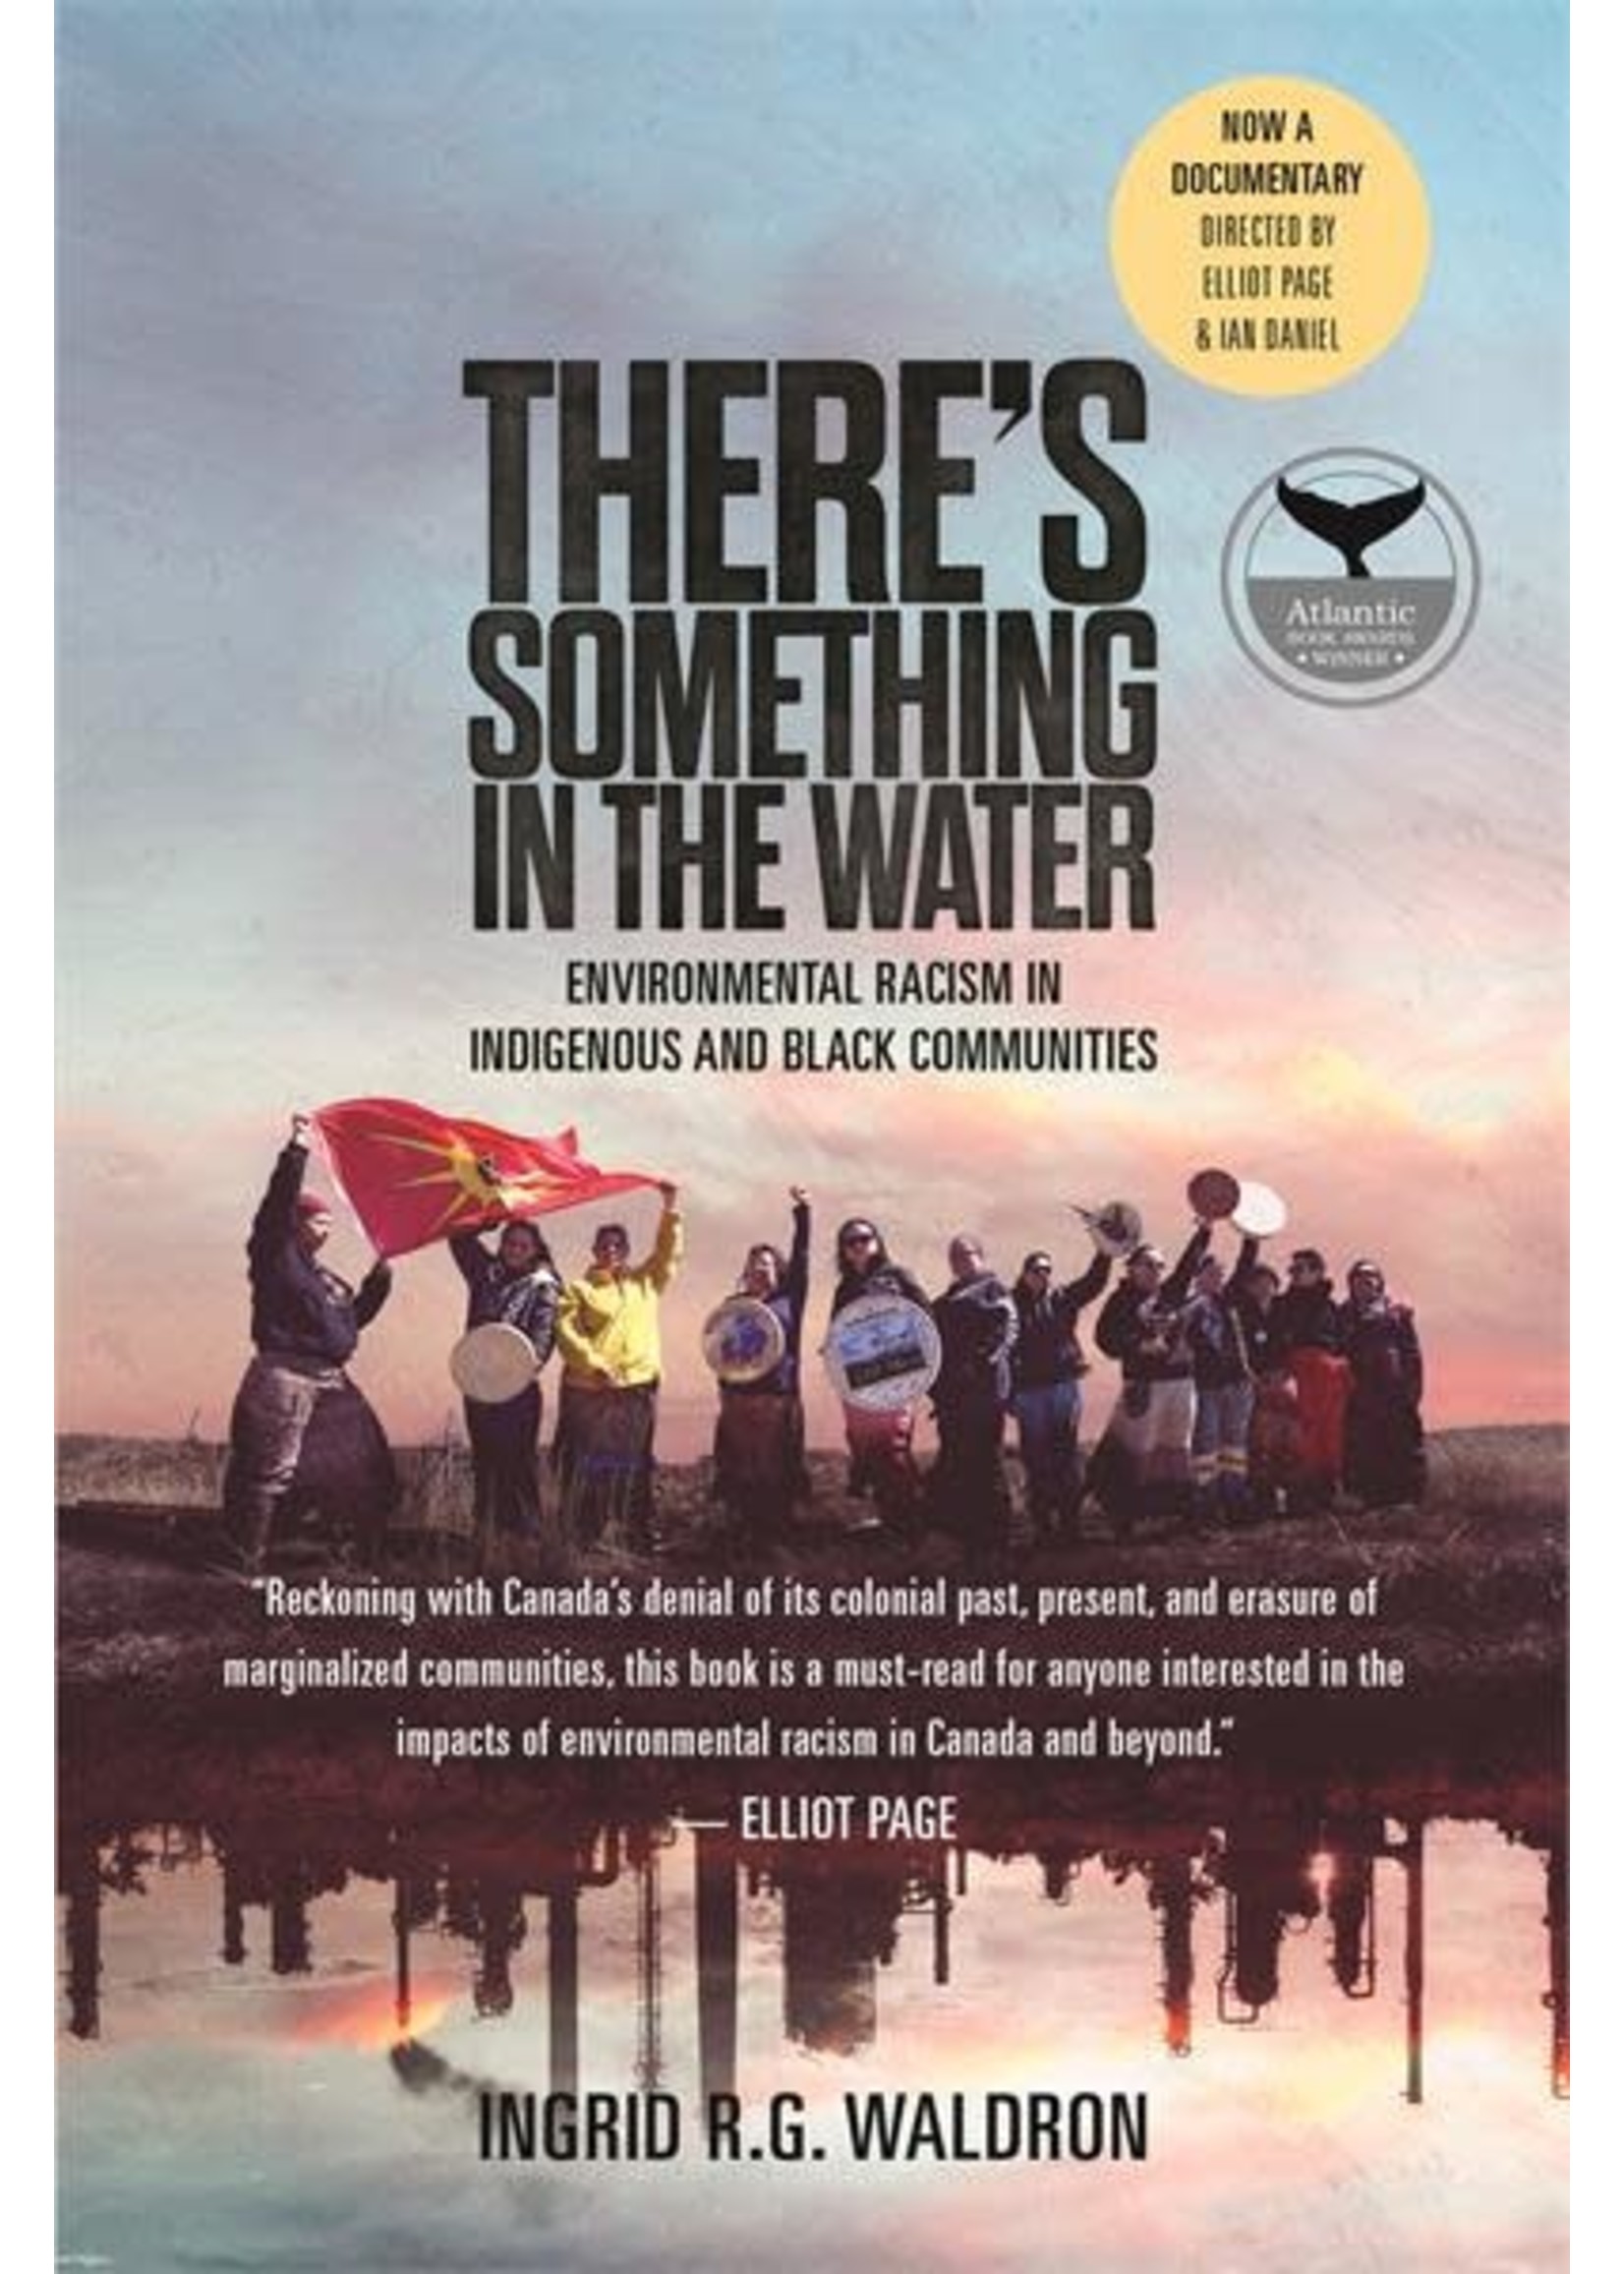 There’s Something In The Water: Environmental Racism in Indigenous & Black Communities by Ingrid R. G. Waldron